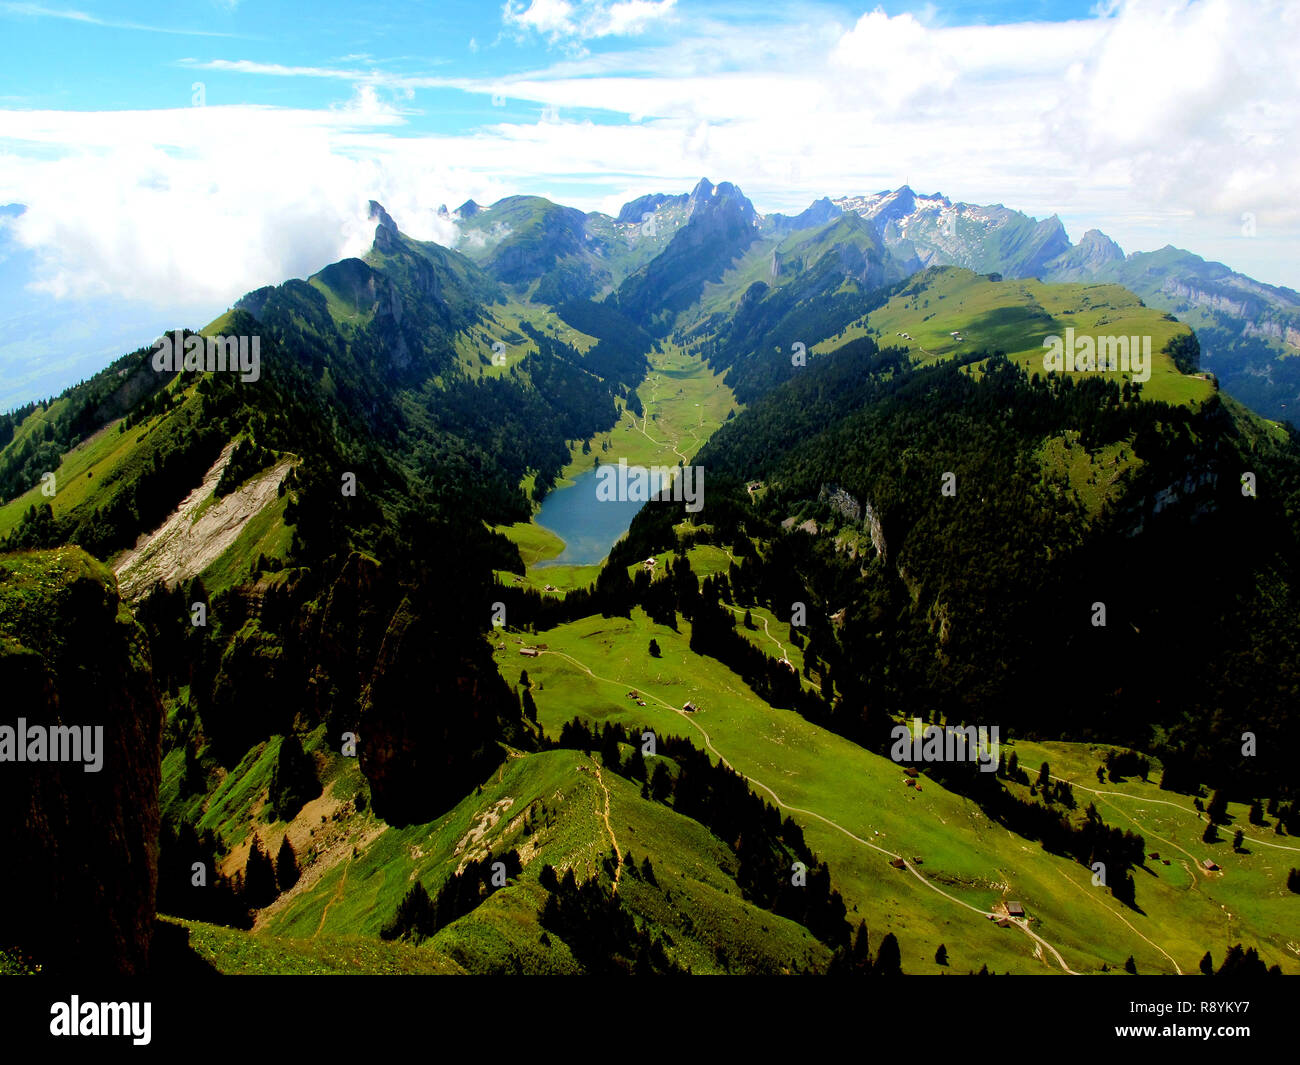 Panorama view from the top of a mountain. Alpstein mountains in Switzerland. Stock Photo